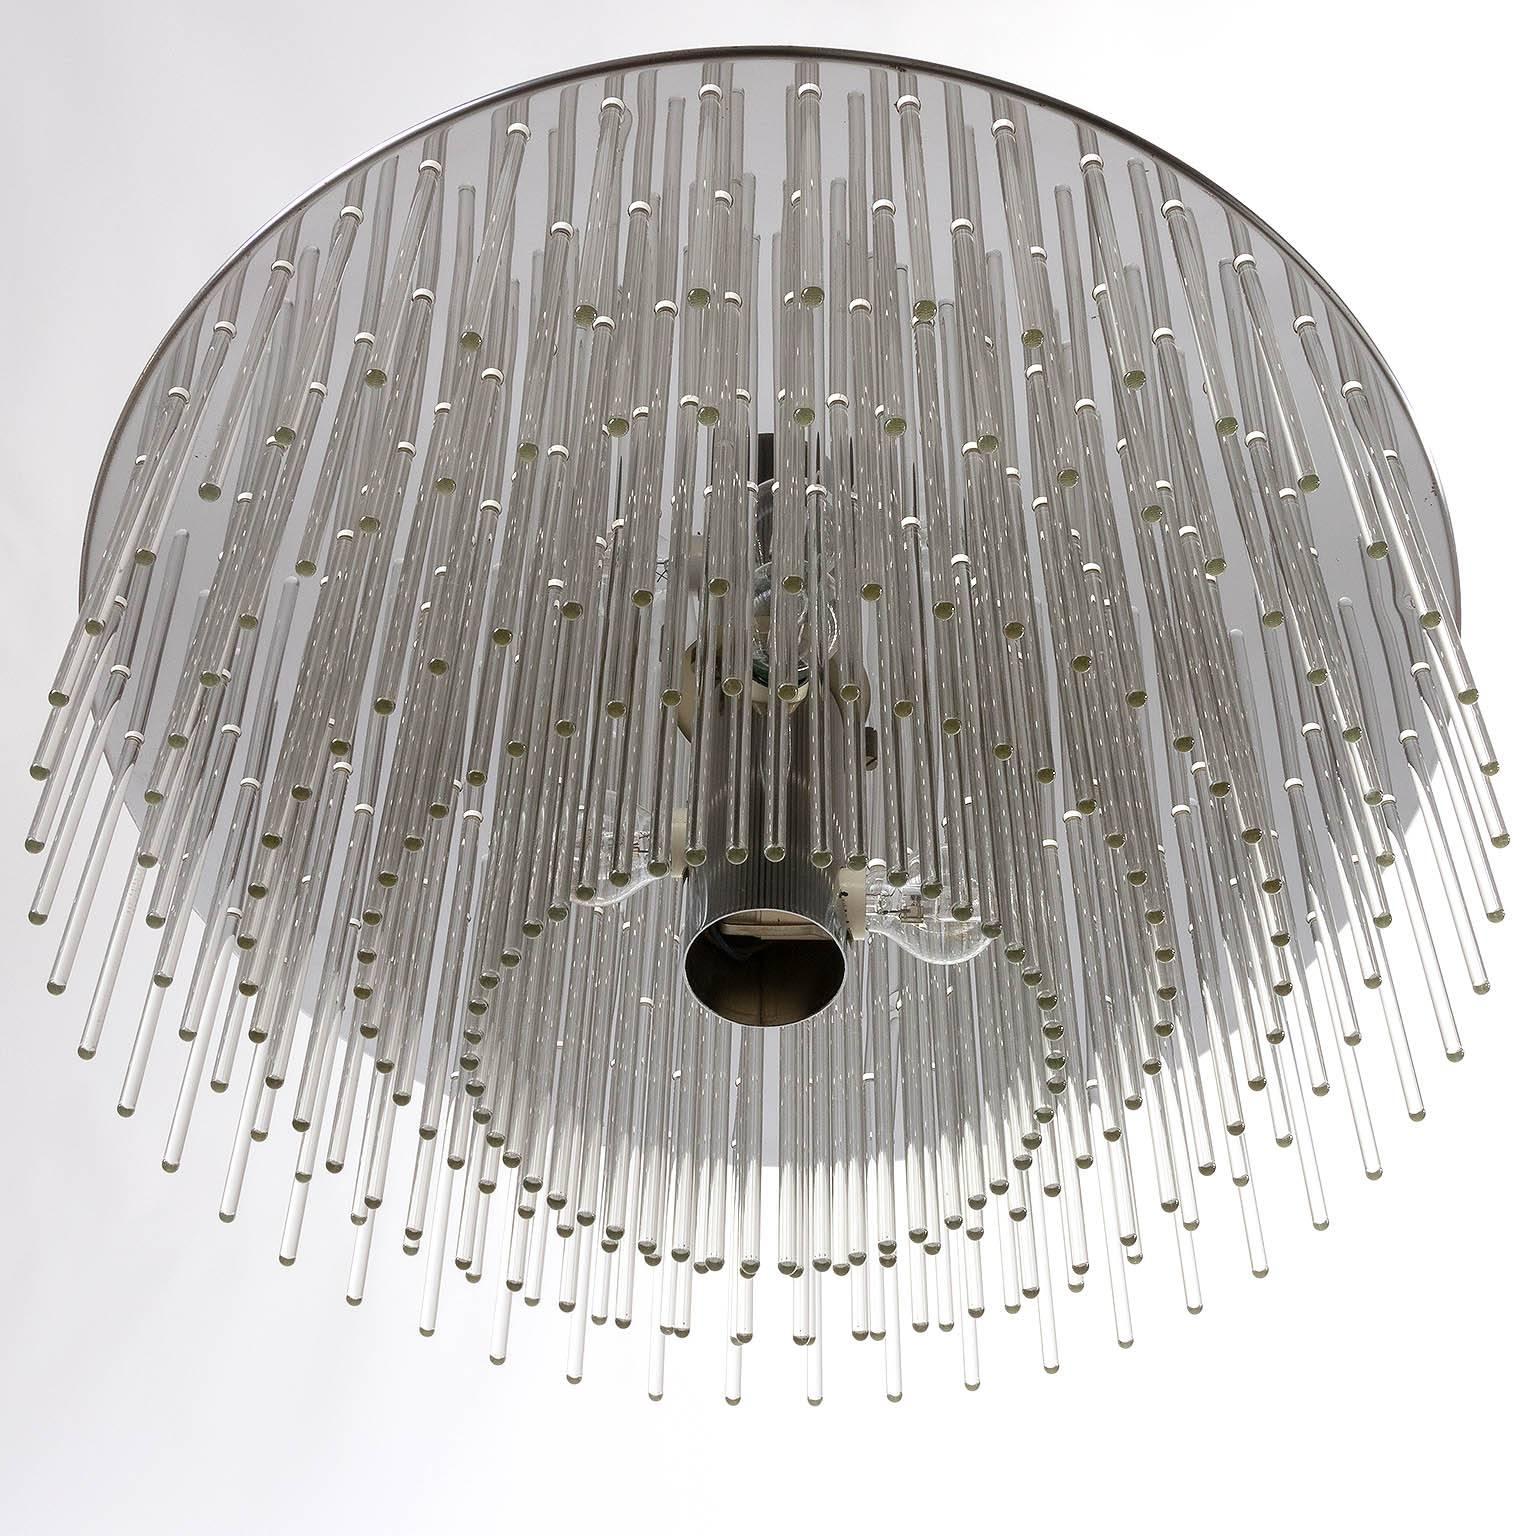 A wonderful Italian multi-tiered flush mount chandelier with varying sized handblown glass rods inserted into the chrome disc. Manufactured in Mid-Century, circa 1970 (late 1960s or early 1970s). 
The light fixture is wired for US junction boxes. It